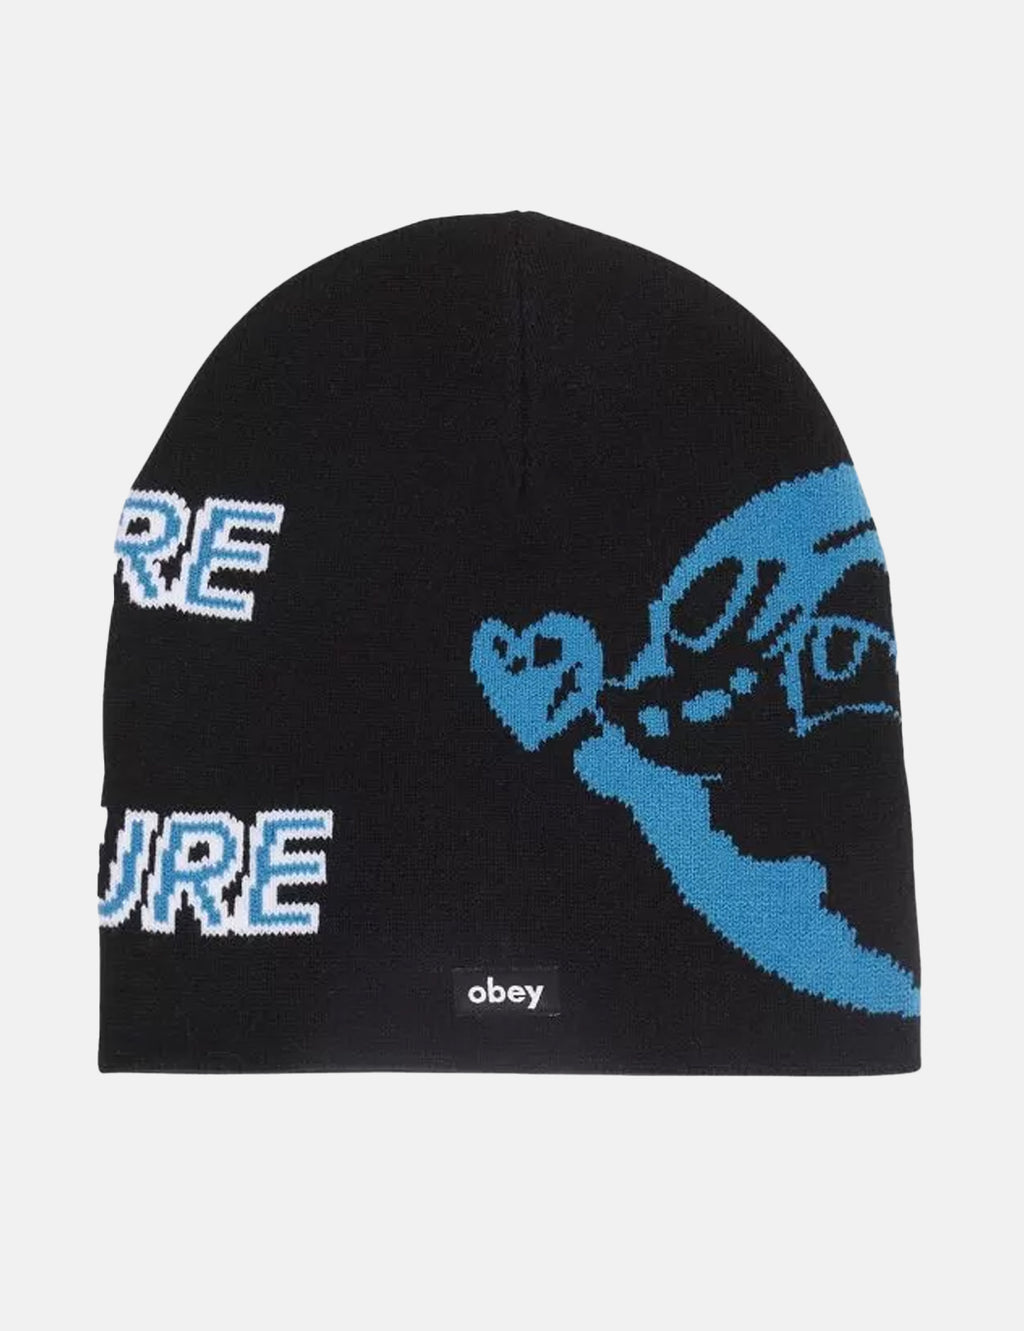 Nuture URBAN Black Urban – EXCESS Nature Obey Beanie Excess. I - And Hat